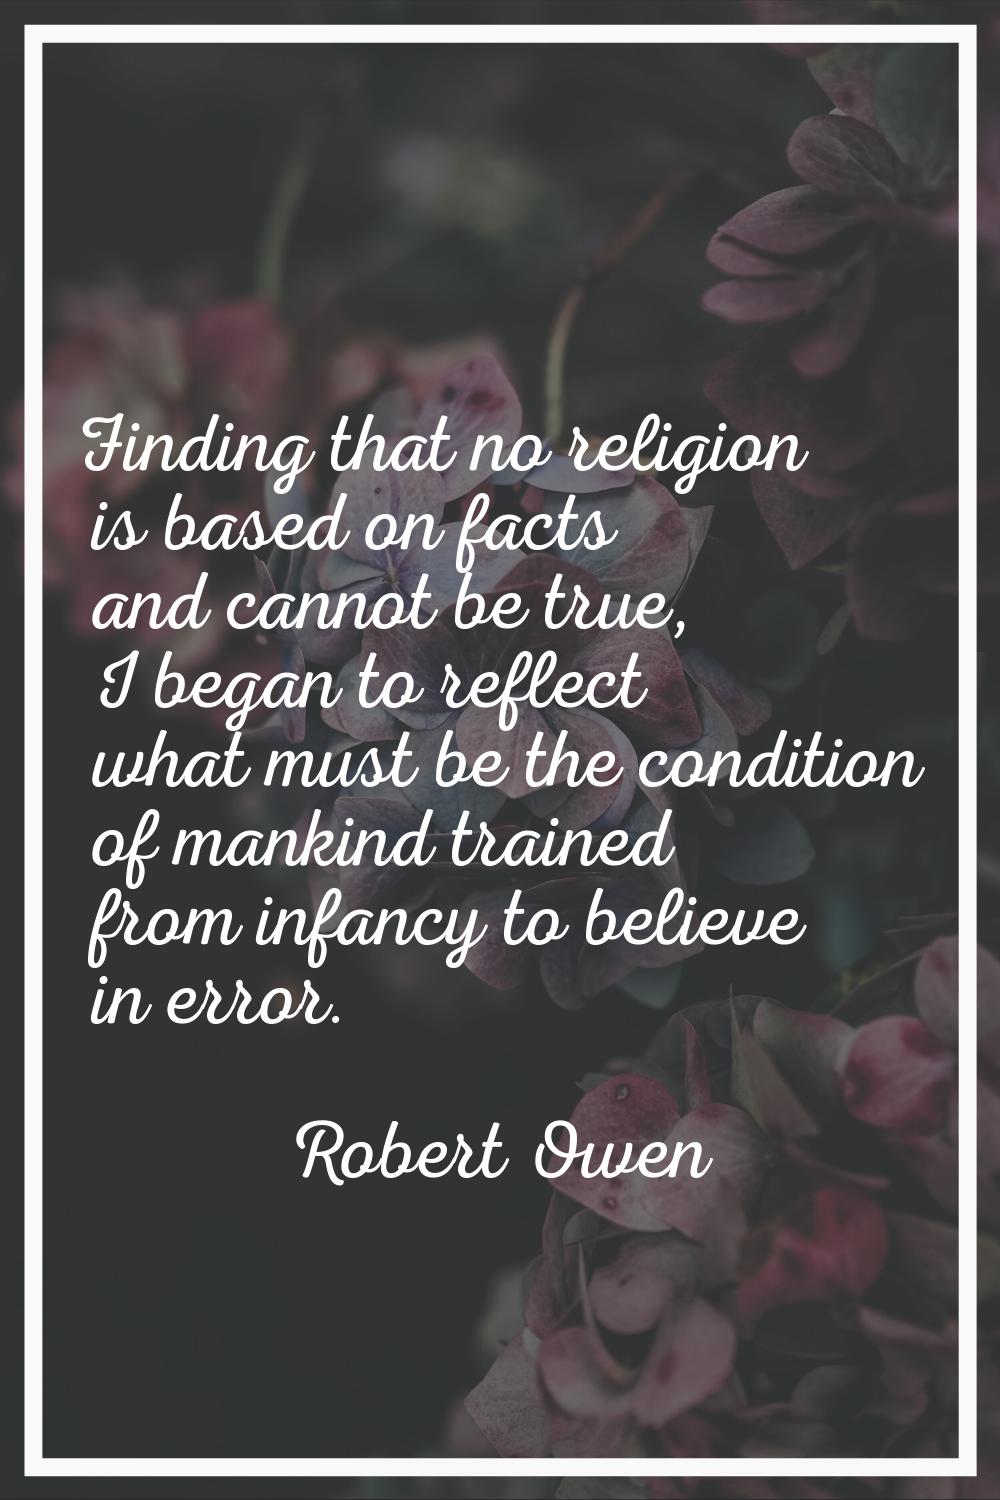 Finding that no religion is based on facts and cannot be true, I began to reflect what must be the 